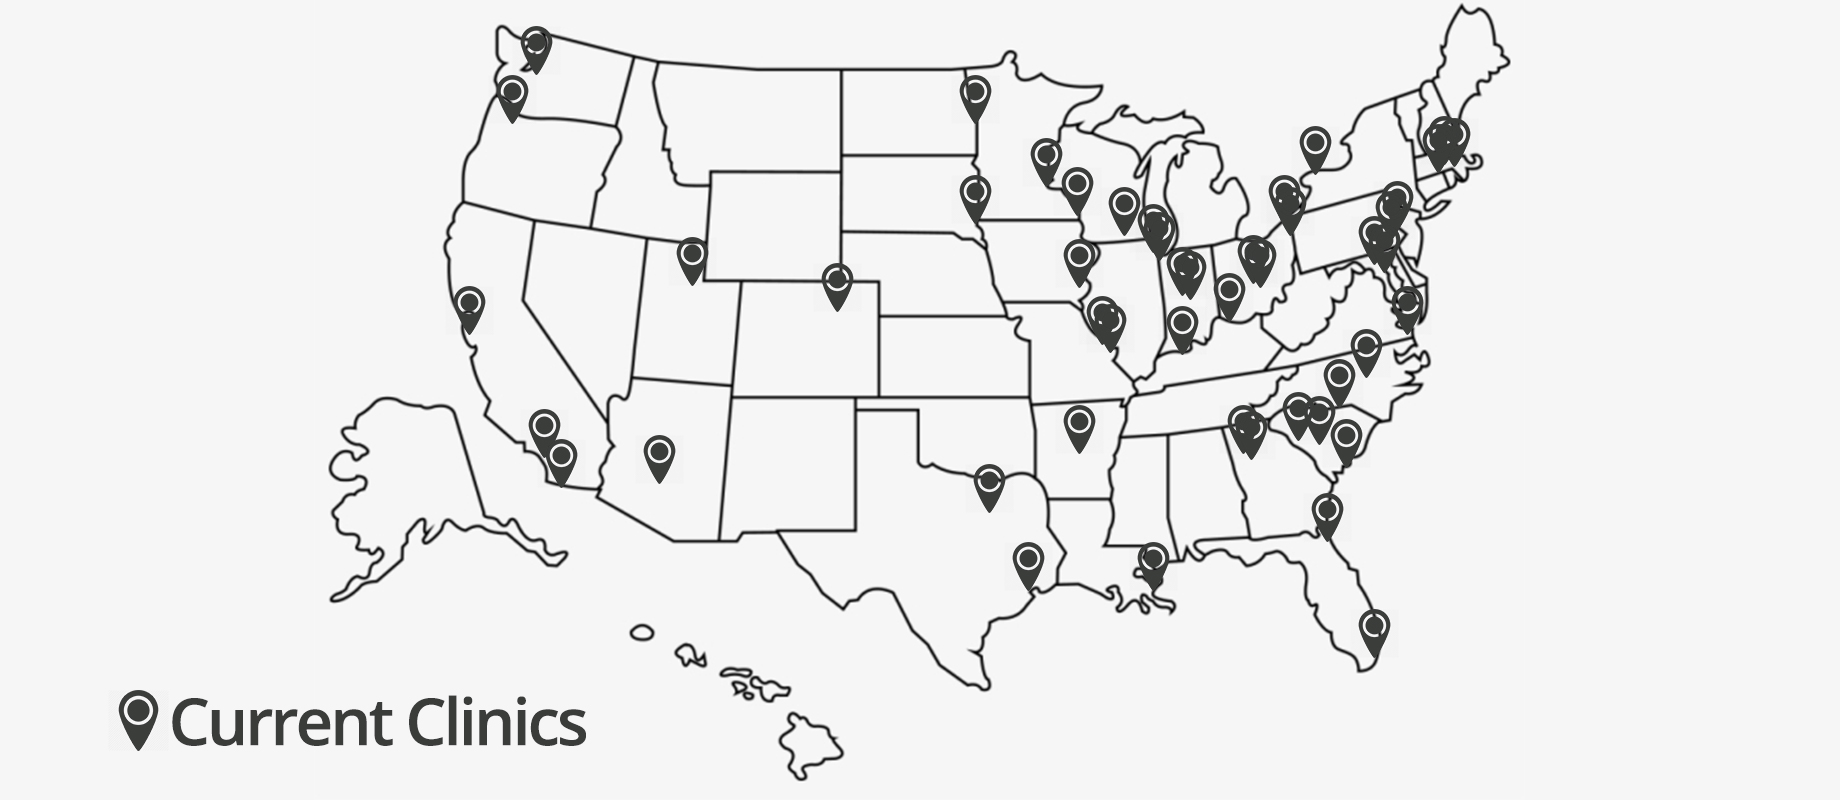 Map showing locations of Down syndrome specialty care clinics in the United States